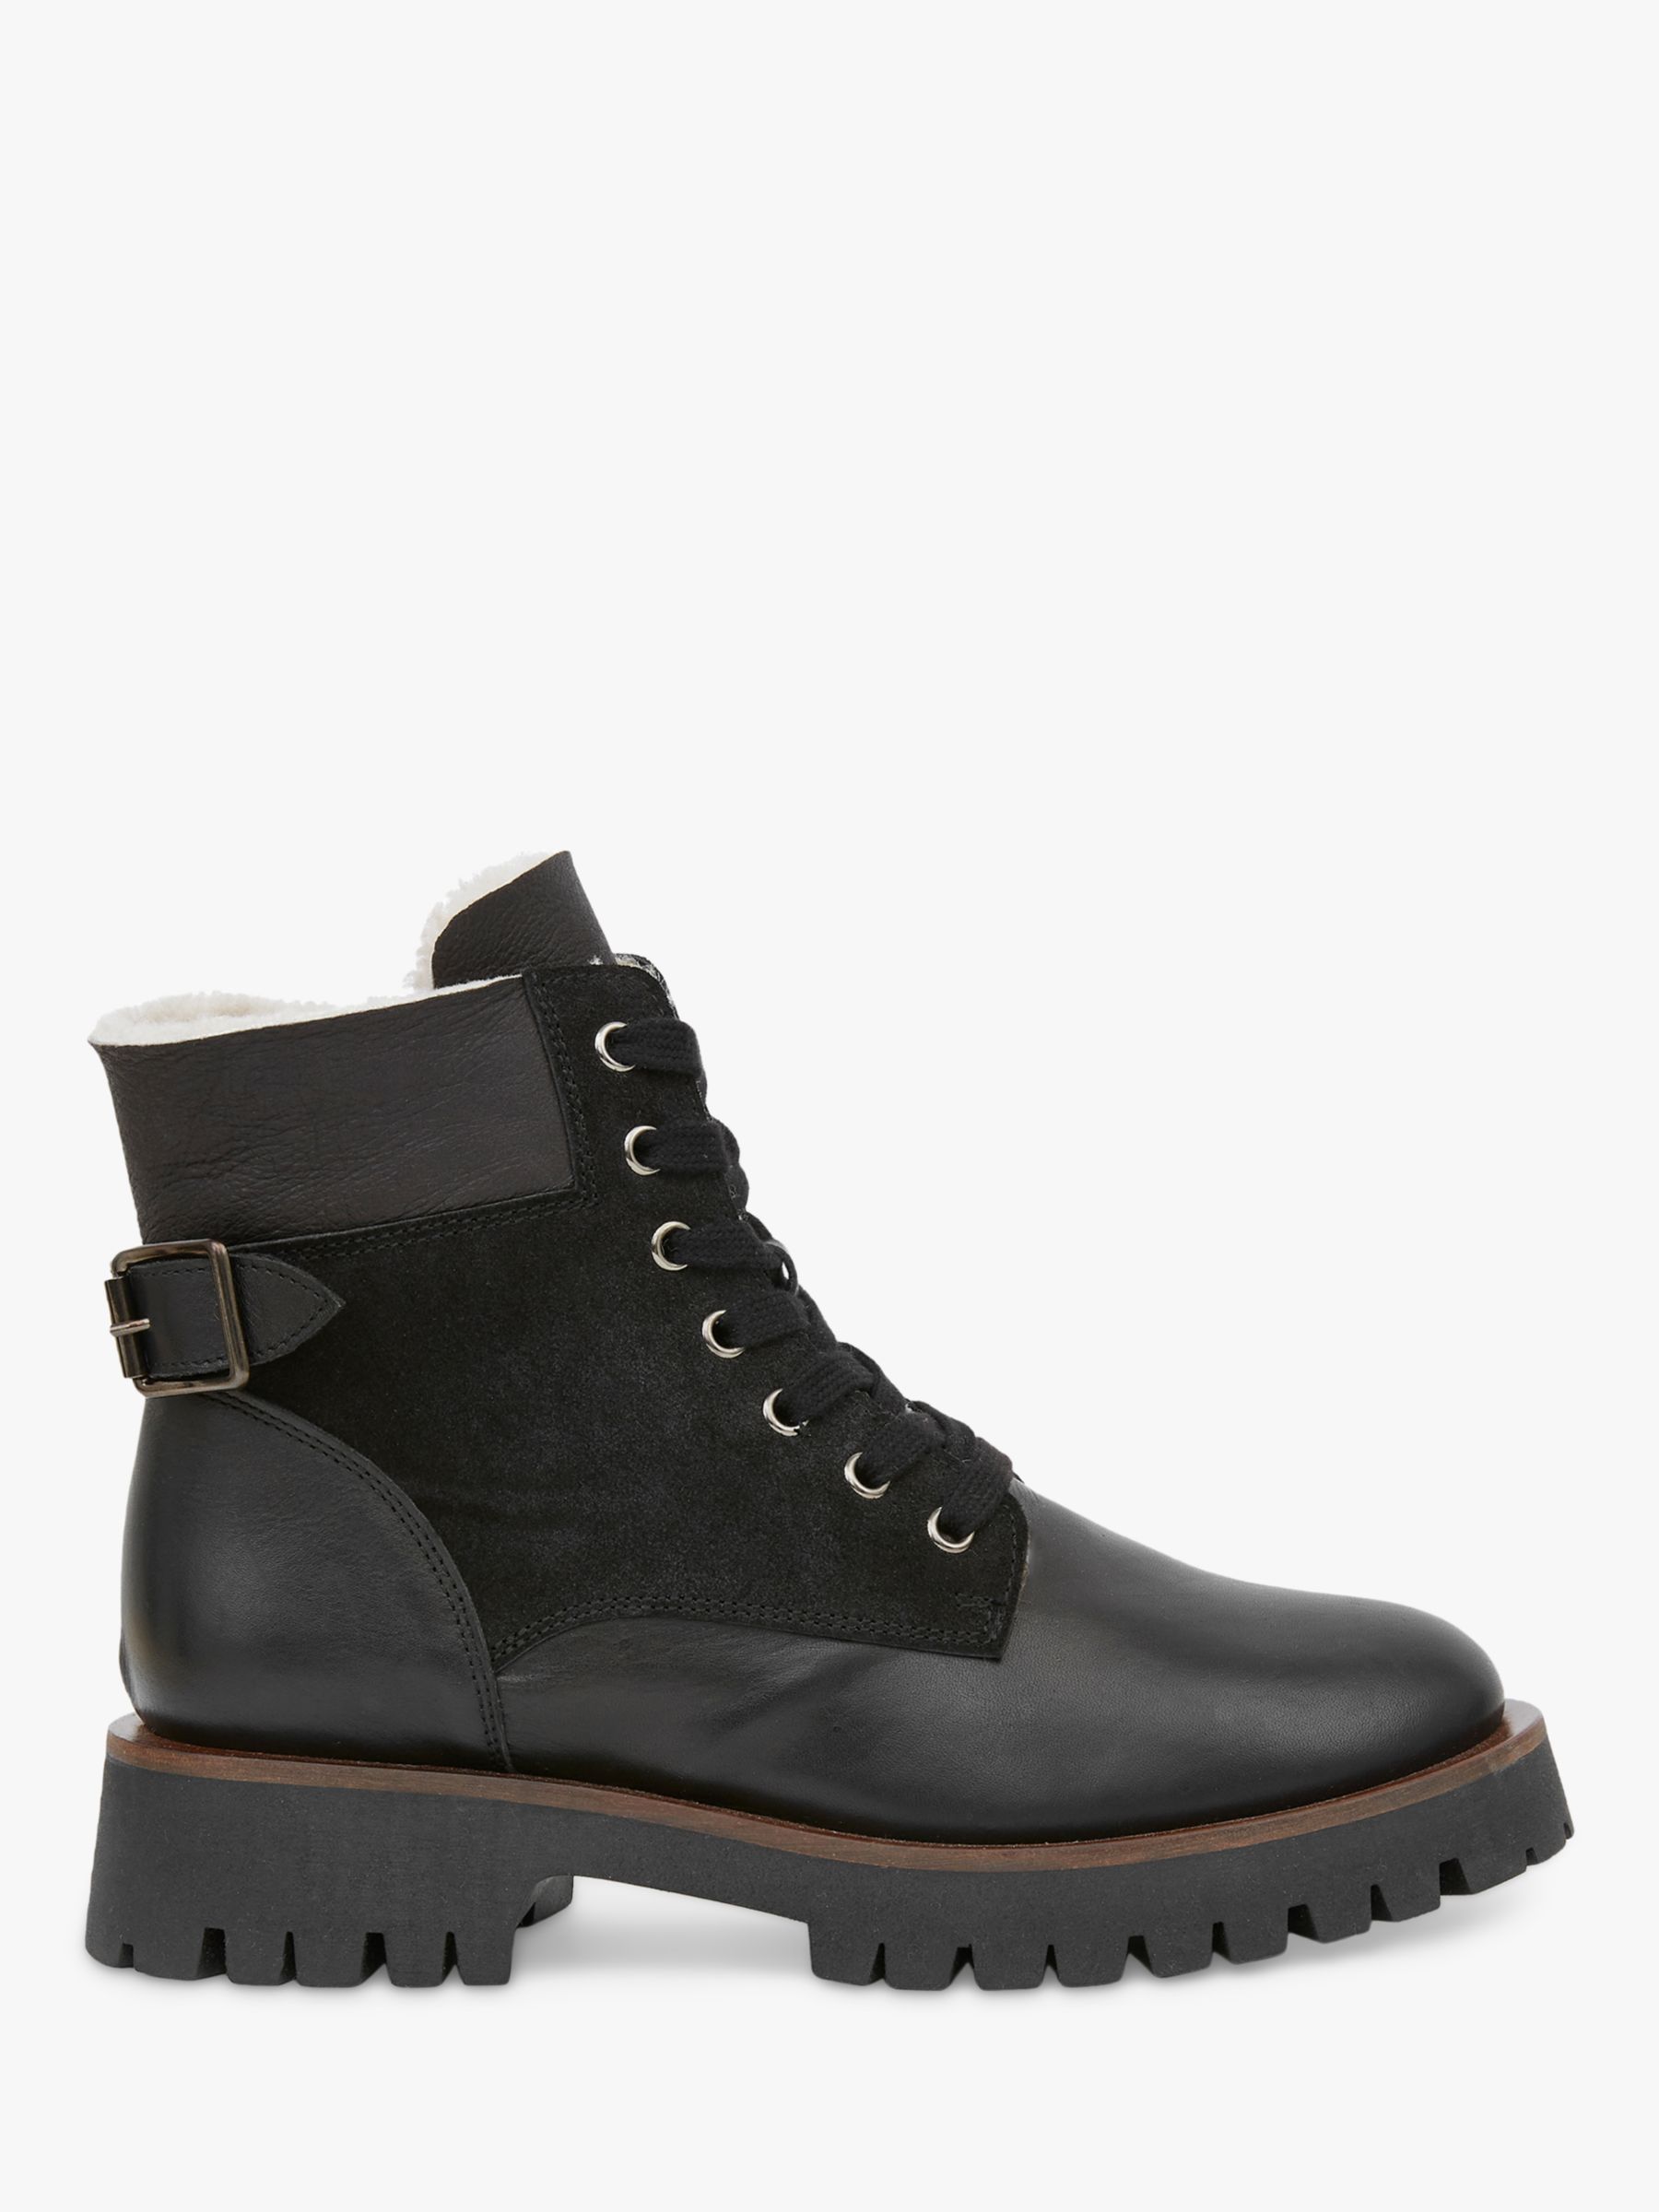 Celtic & Co. Leather And Sheepskin Wool Lace Up Boots at John Lewis ...